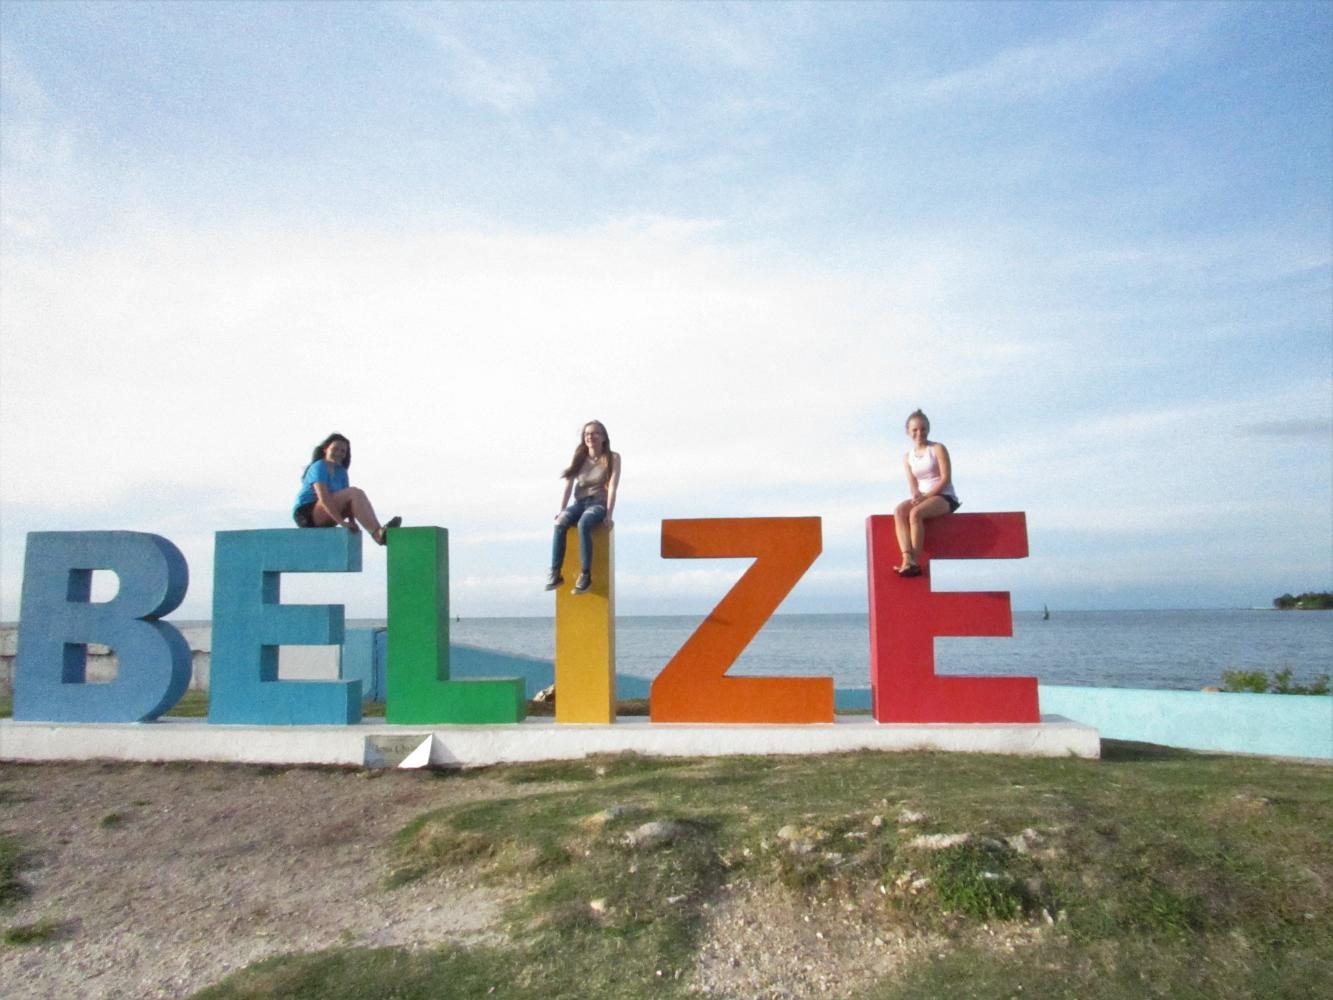 The Belize sign in Belize City stood along the coast.